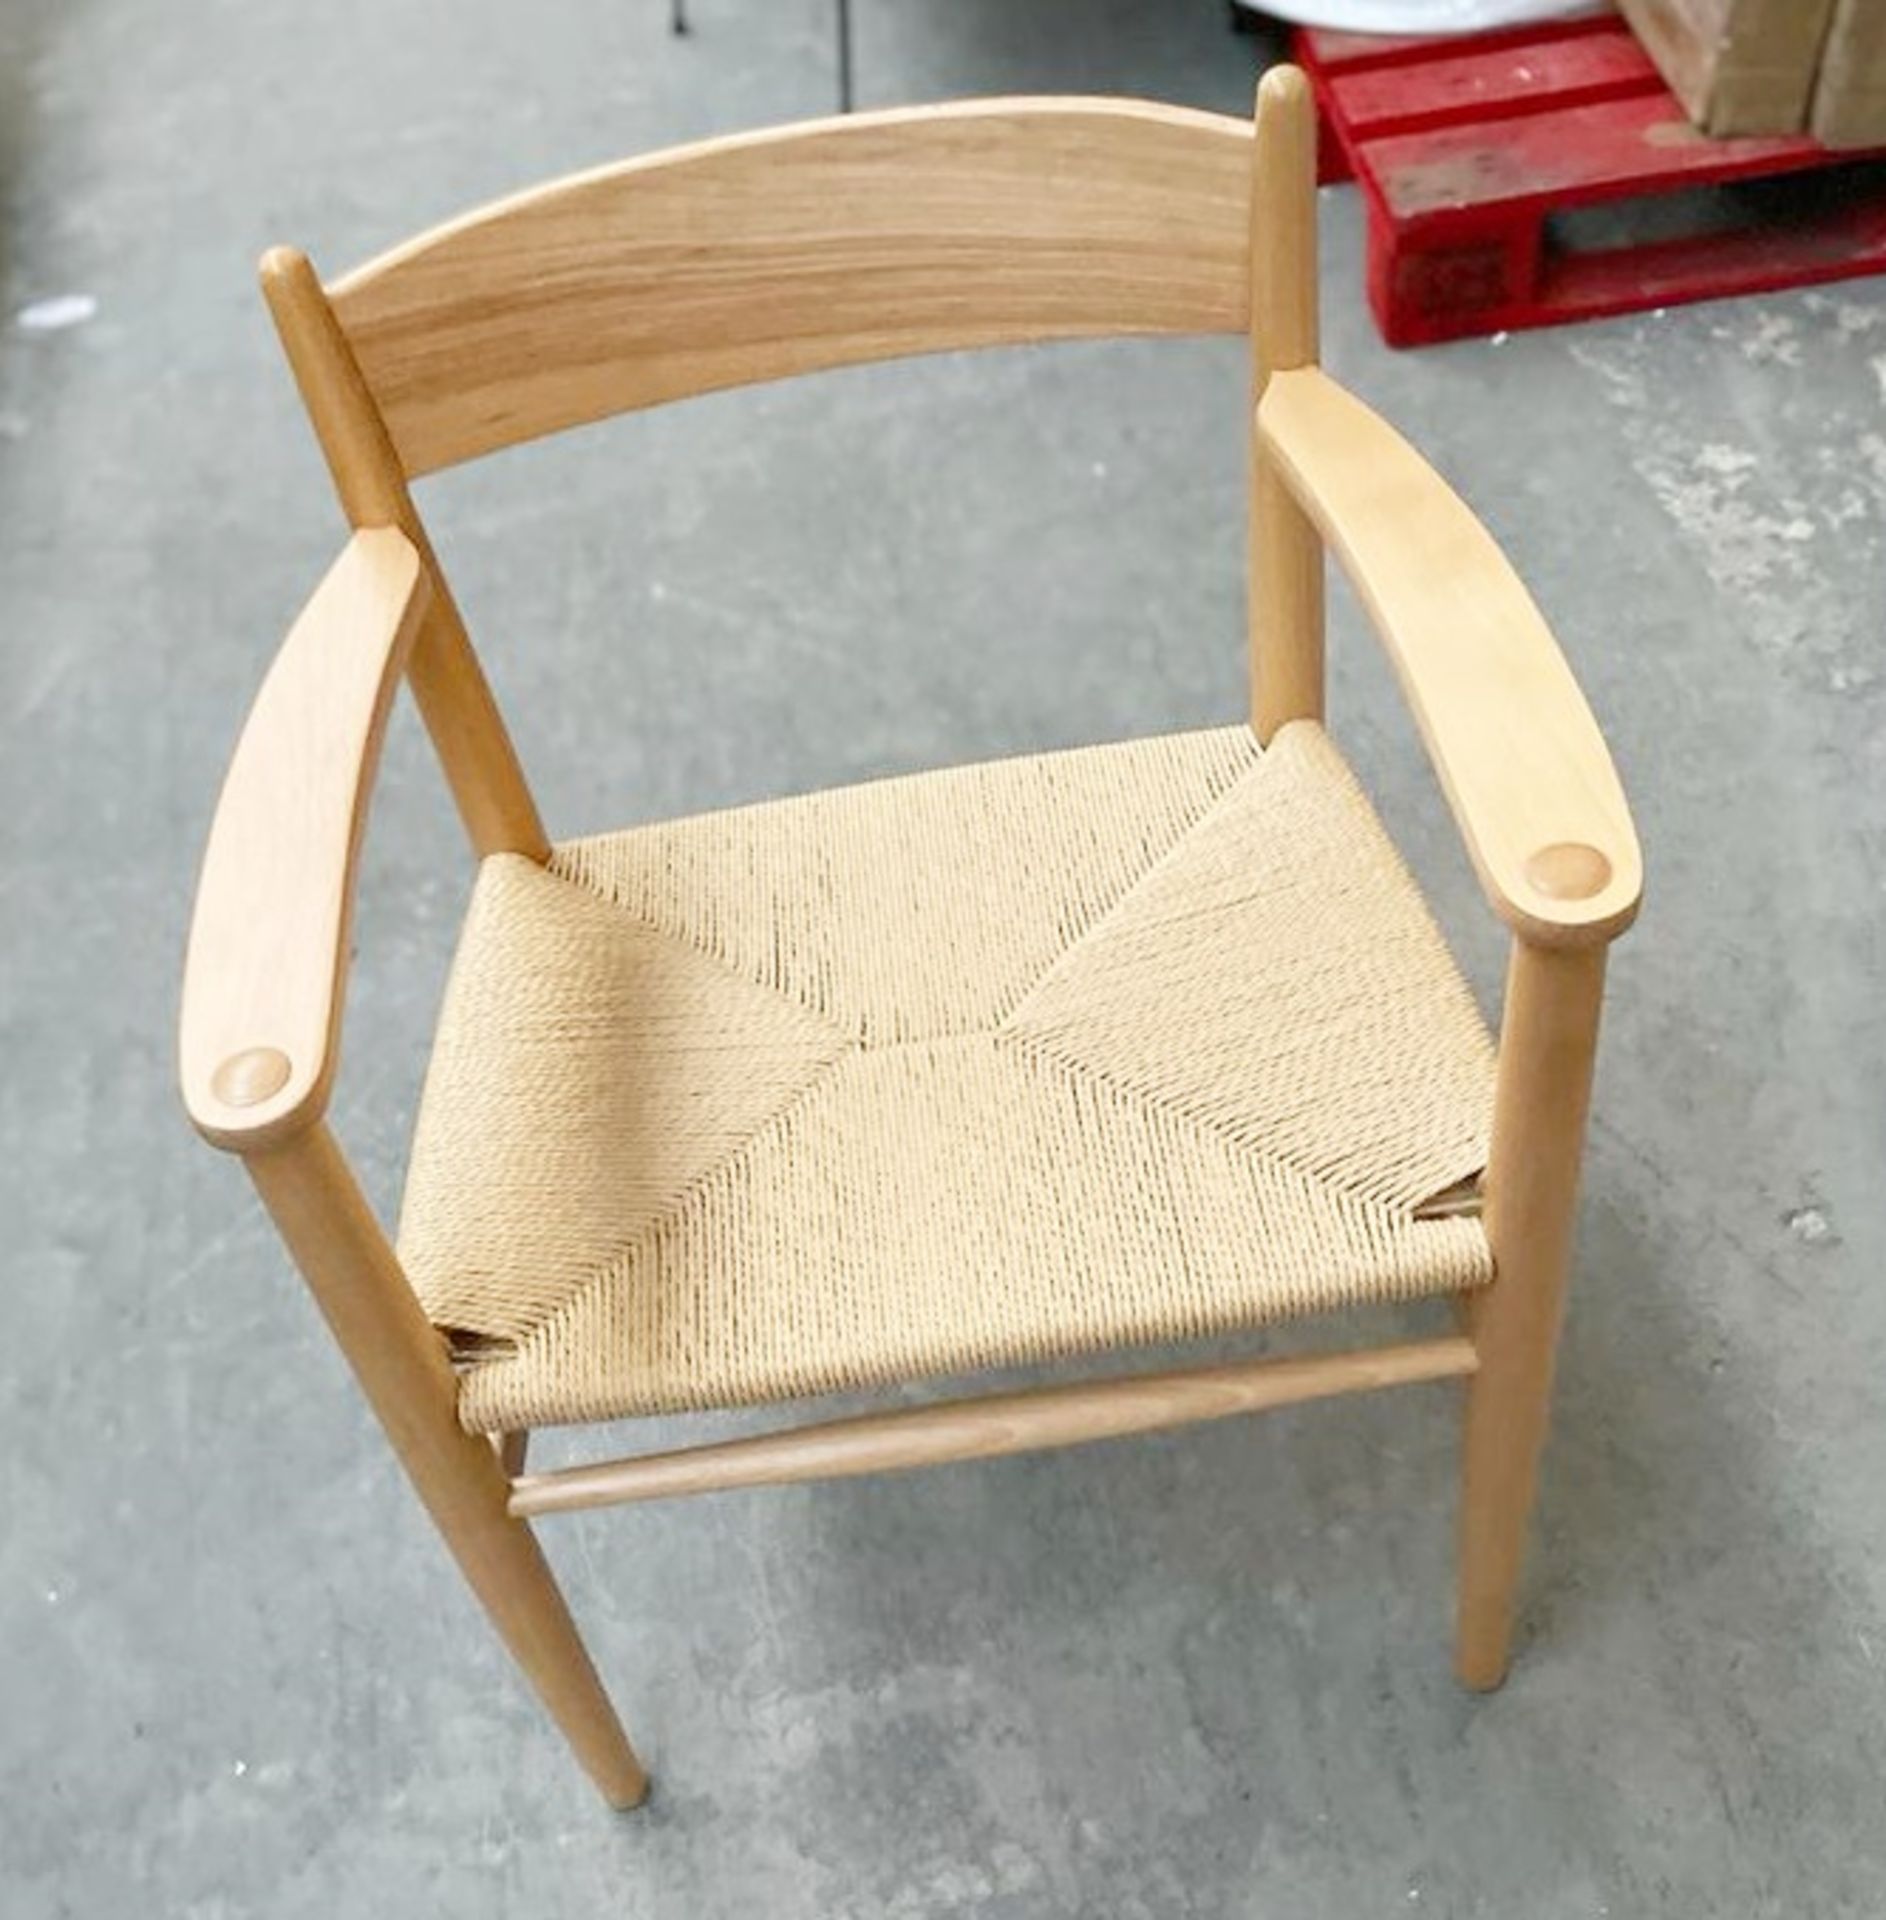 2 x Nielsen Natural + Natural Cord Chair With Arm Rests - Dimensions: 50(h) x 48(d) x 58(w) cm - - Image 7 of 7